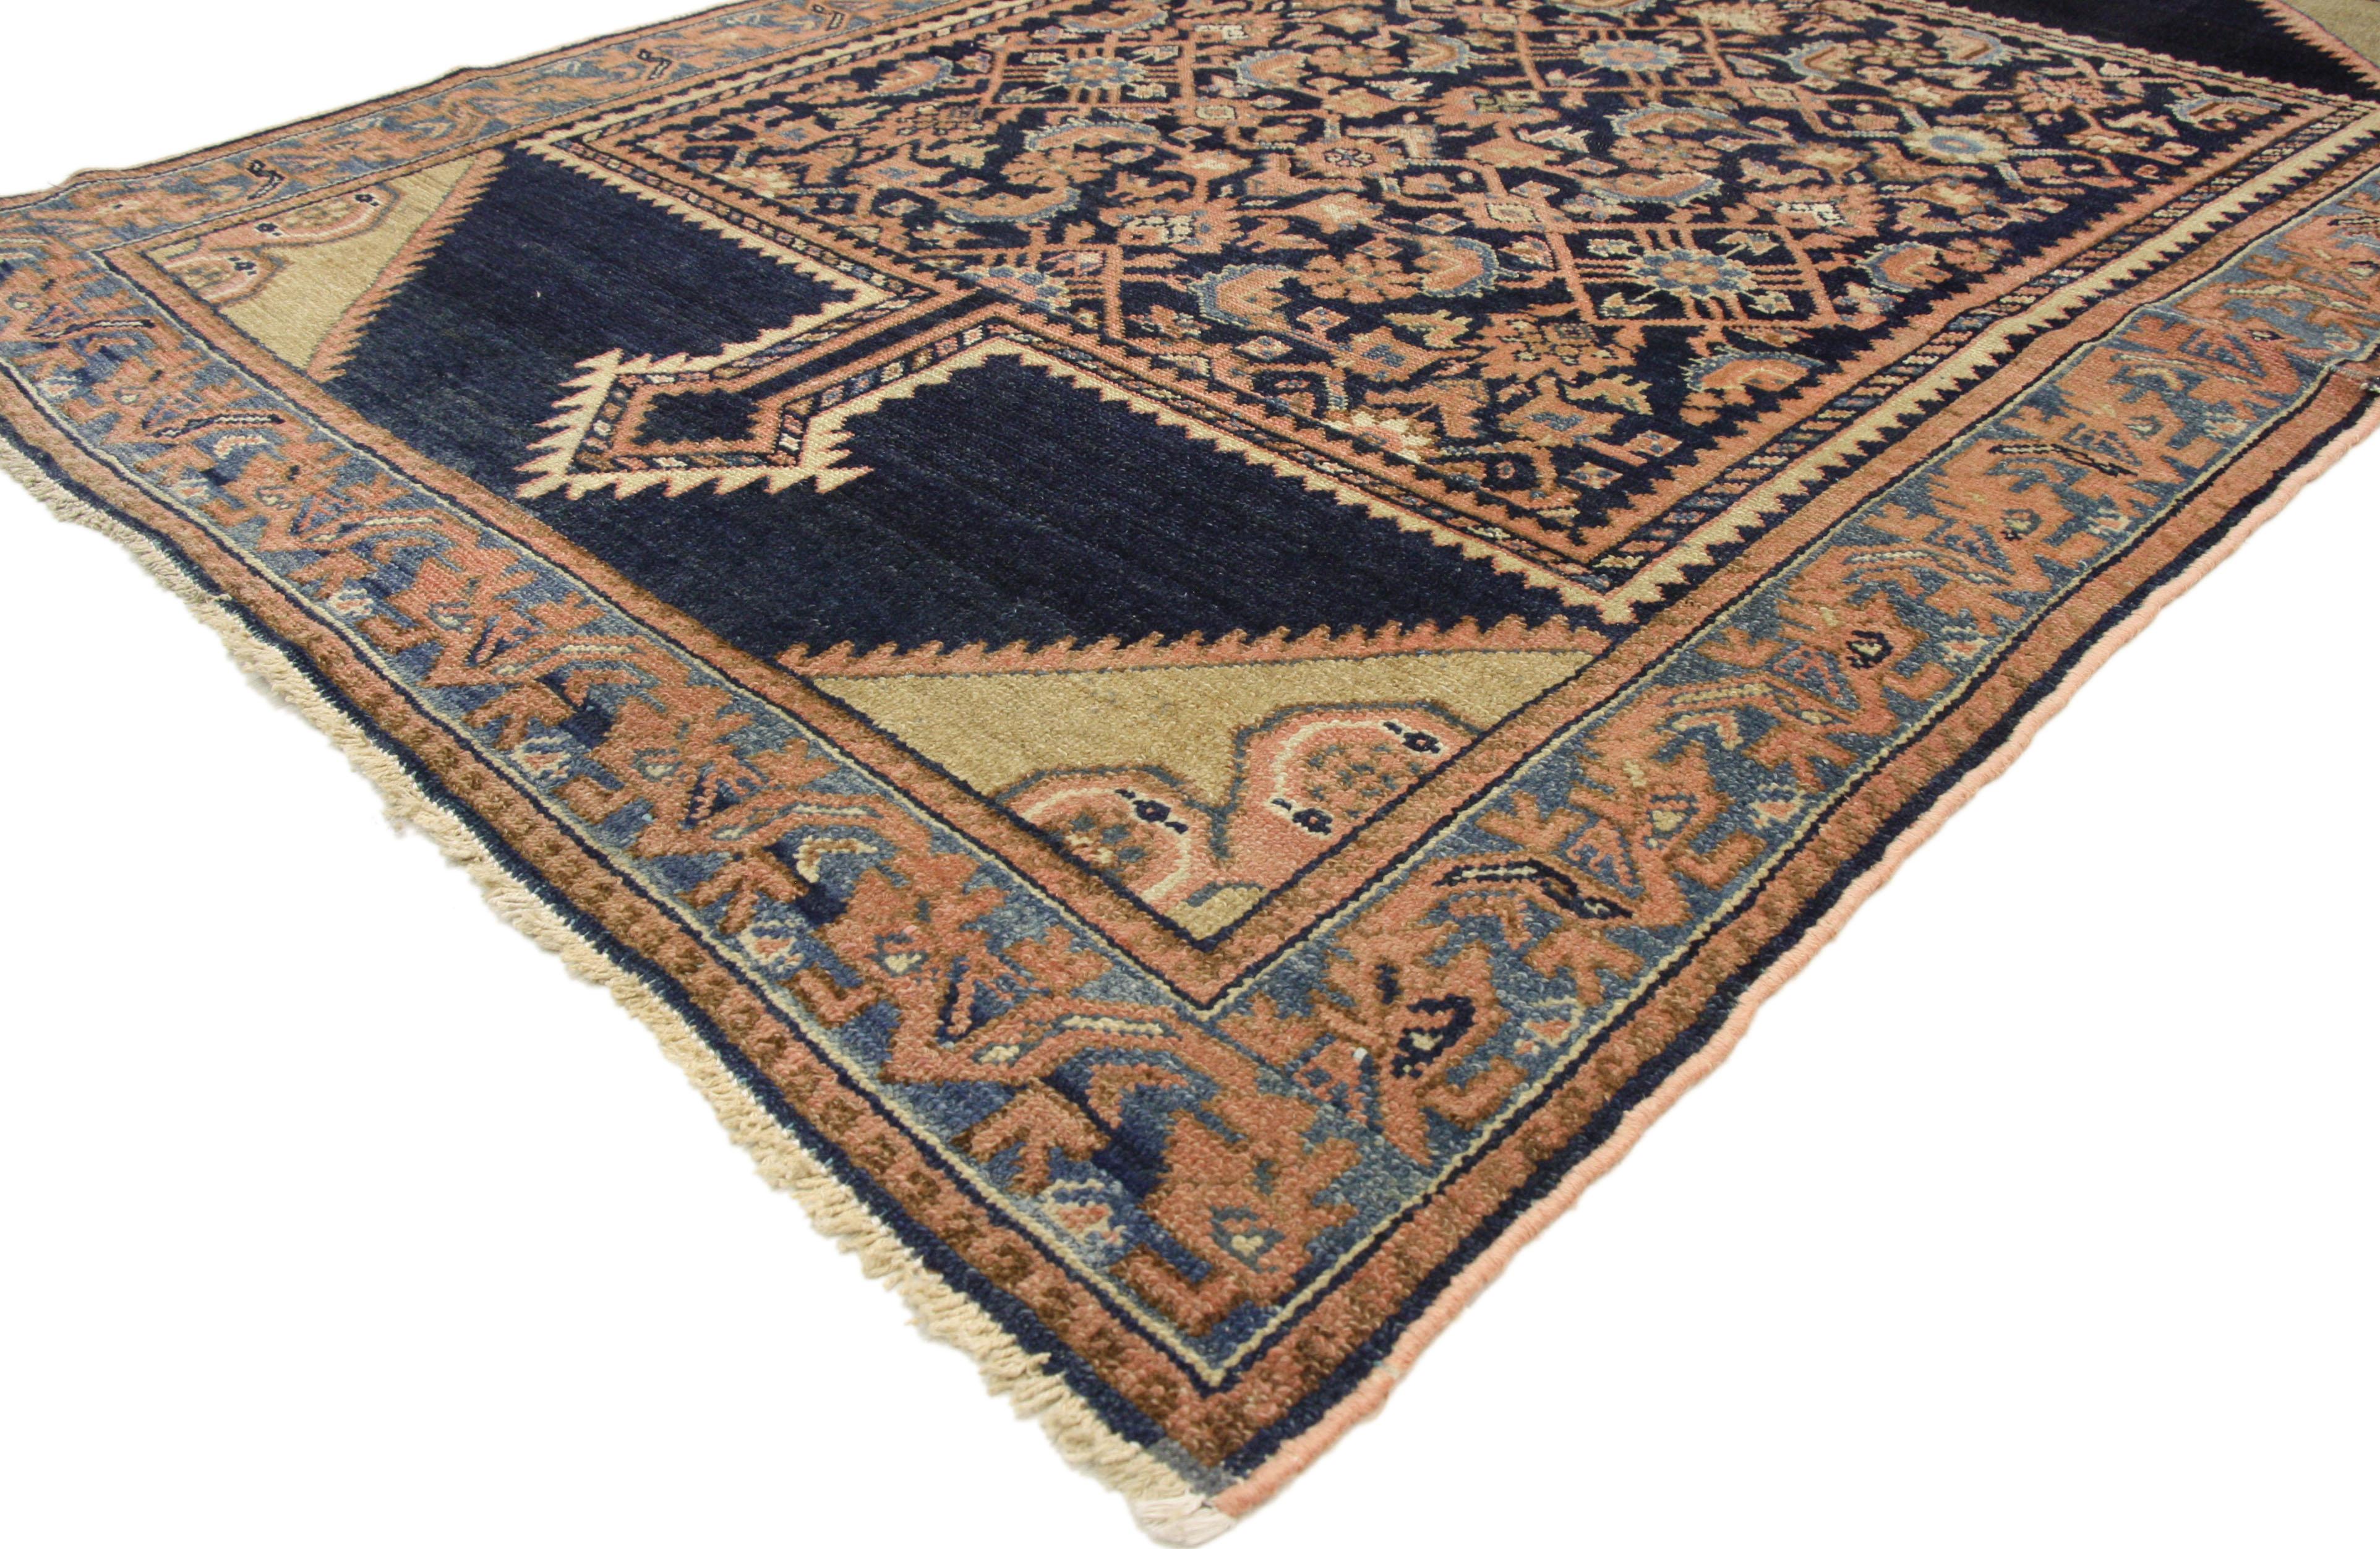 72588 Antique Persian Malayer Rug with Rustic Romantic Georgian Style. A beautiful combination of rustic pink hues and soft blues in this hand-knotted wool antique Persian Malayer rug creates a delicate and effortlessly romantic ambiance. Taking